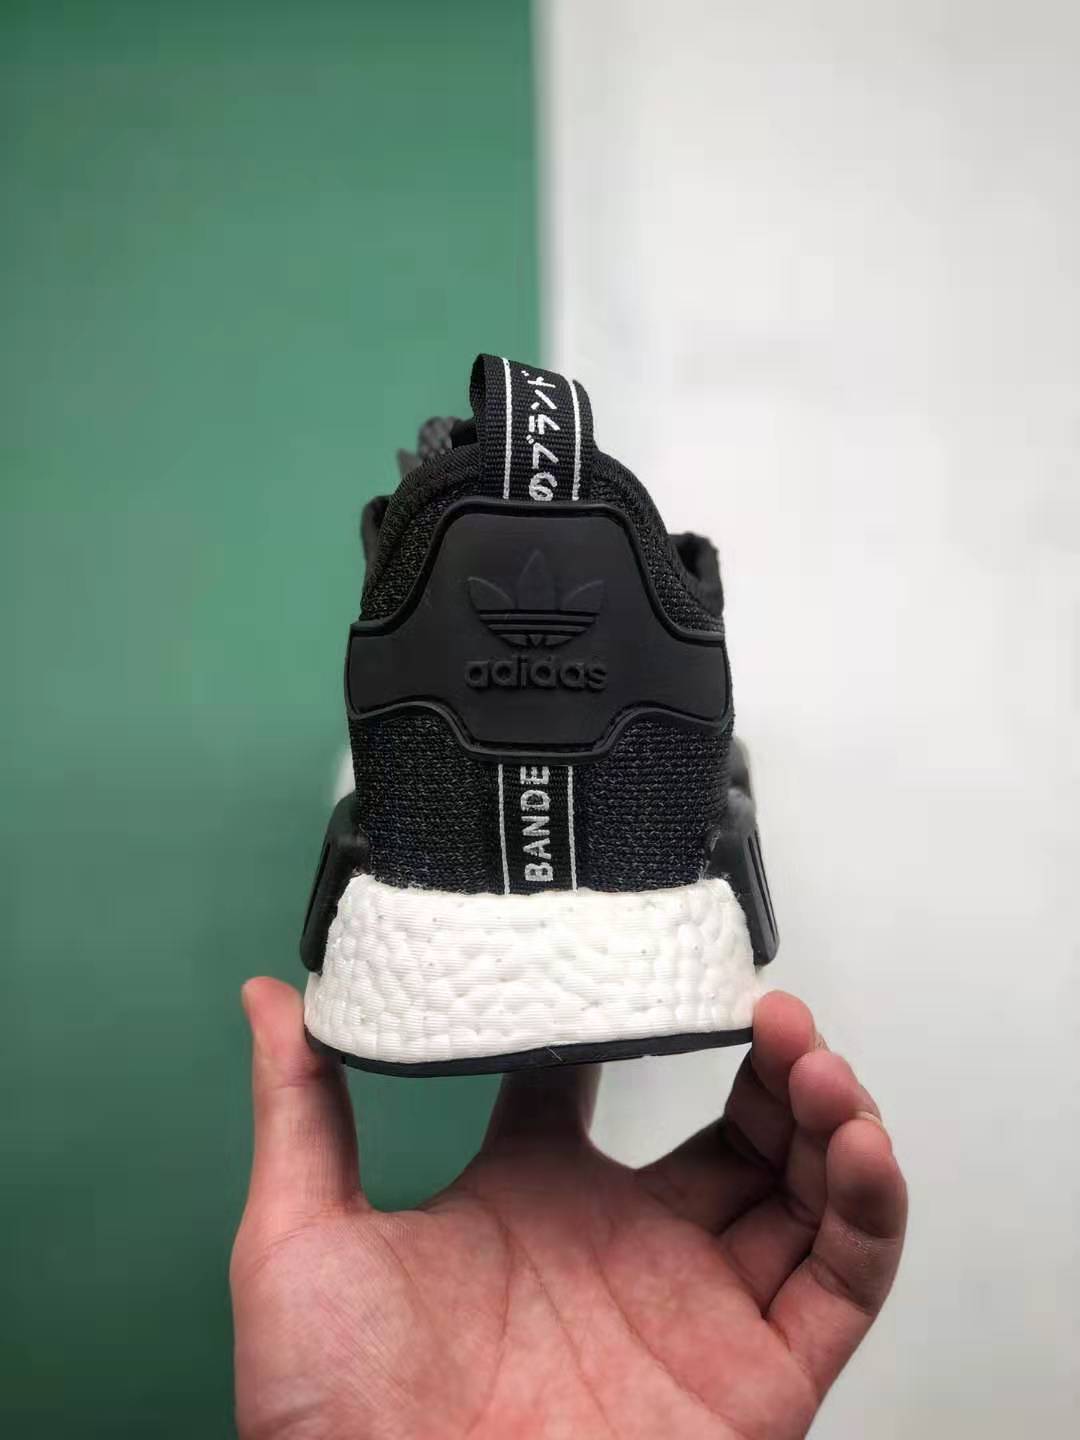 Adidas atmos x NMD_R1 'Black' G27331 - Top Notch Collaborative Sneakers